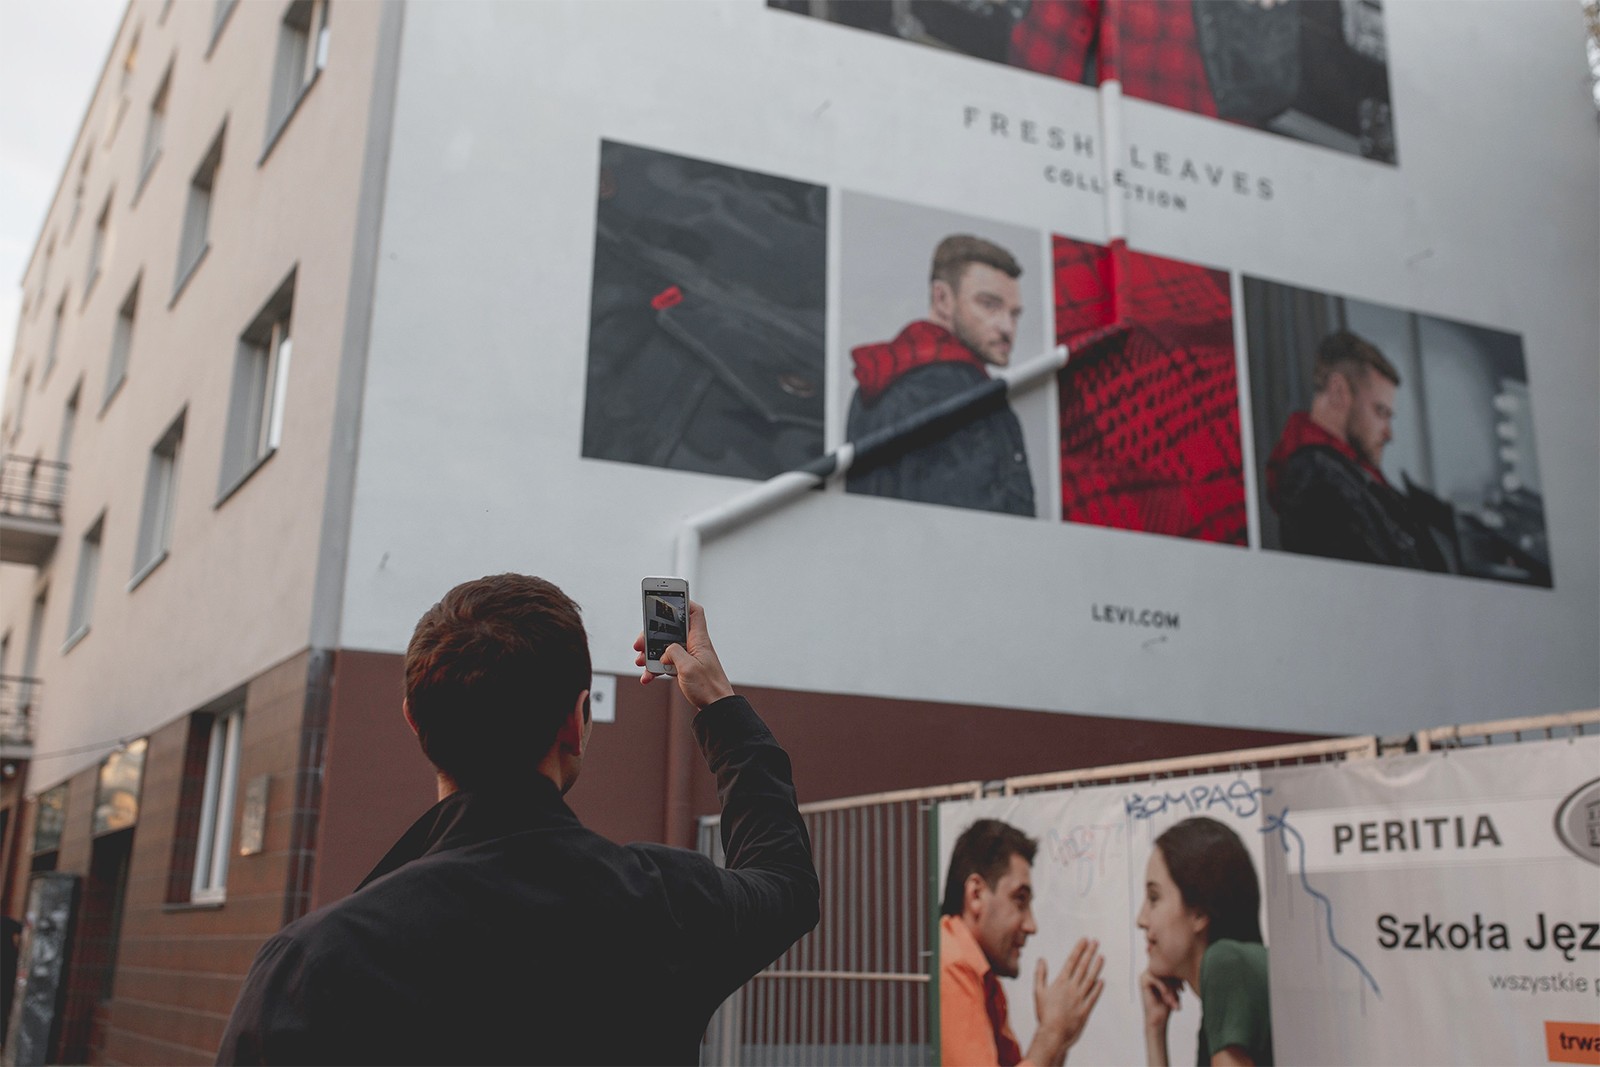 Mural for Levi's at the 85 Solec Street in Warsaw | Fresh Leaves | Portfolio